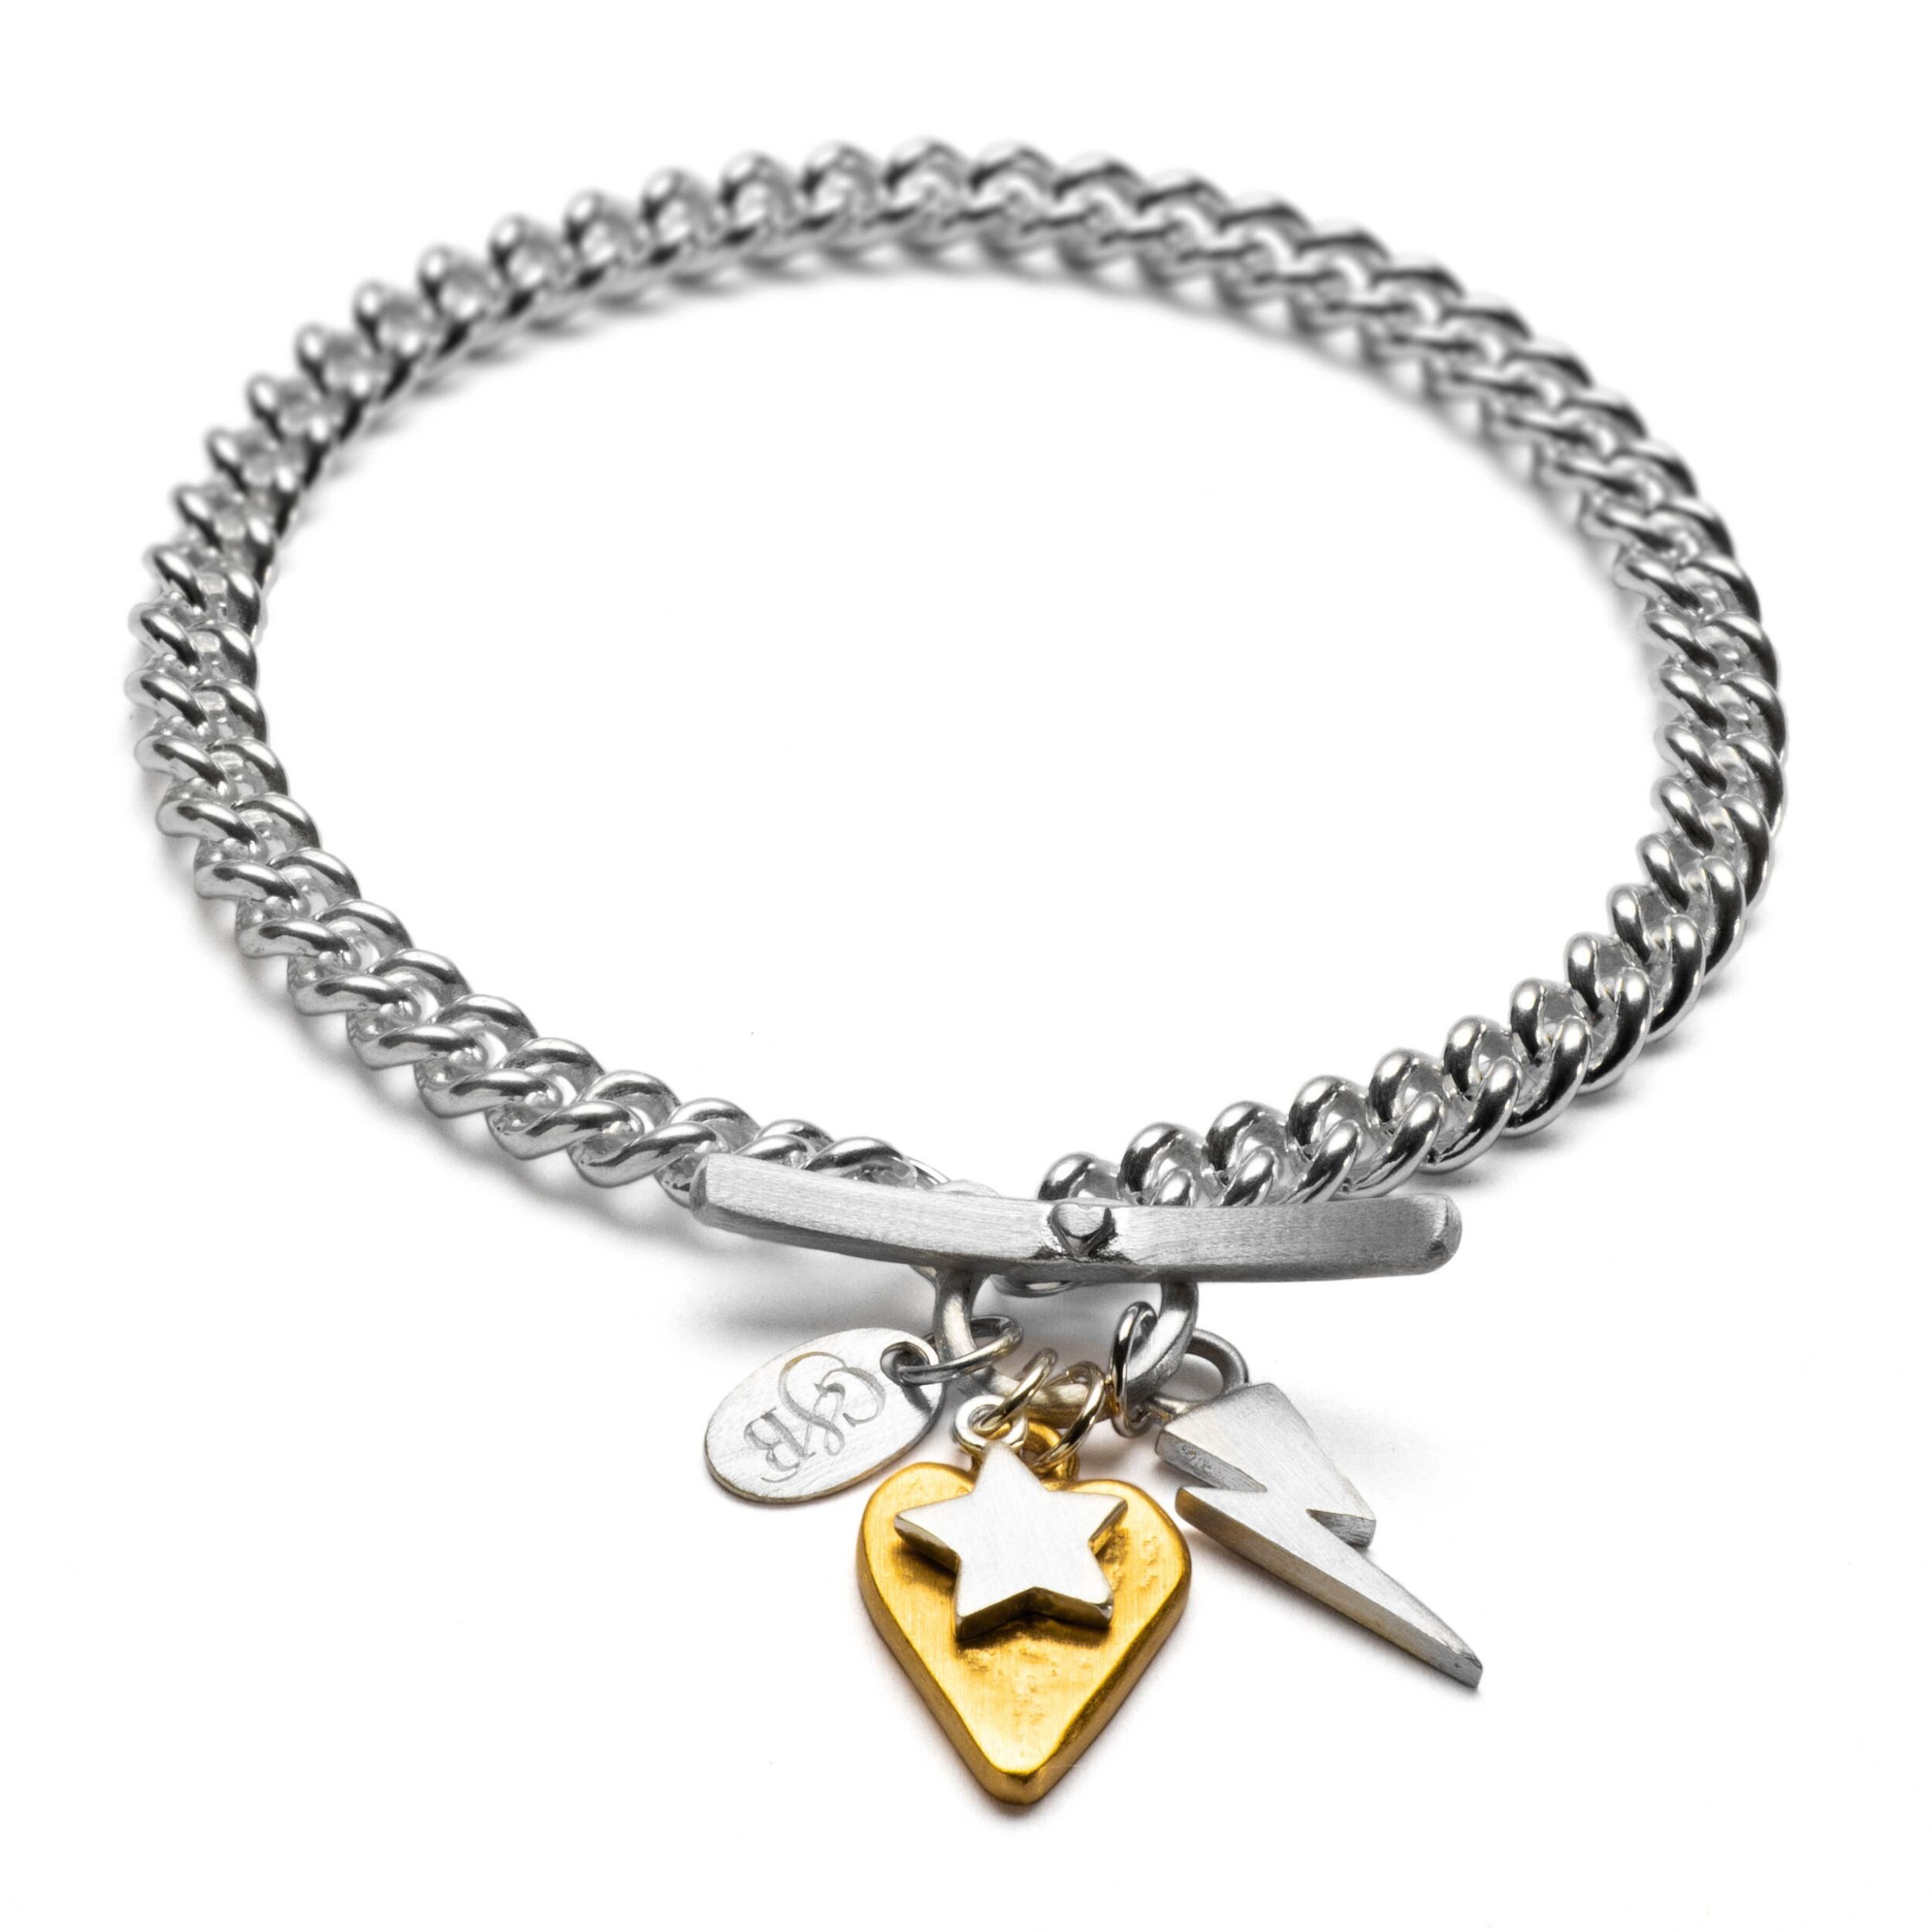 chunky sterling silver charm bracelet with gold heart